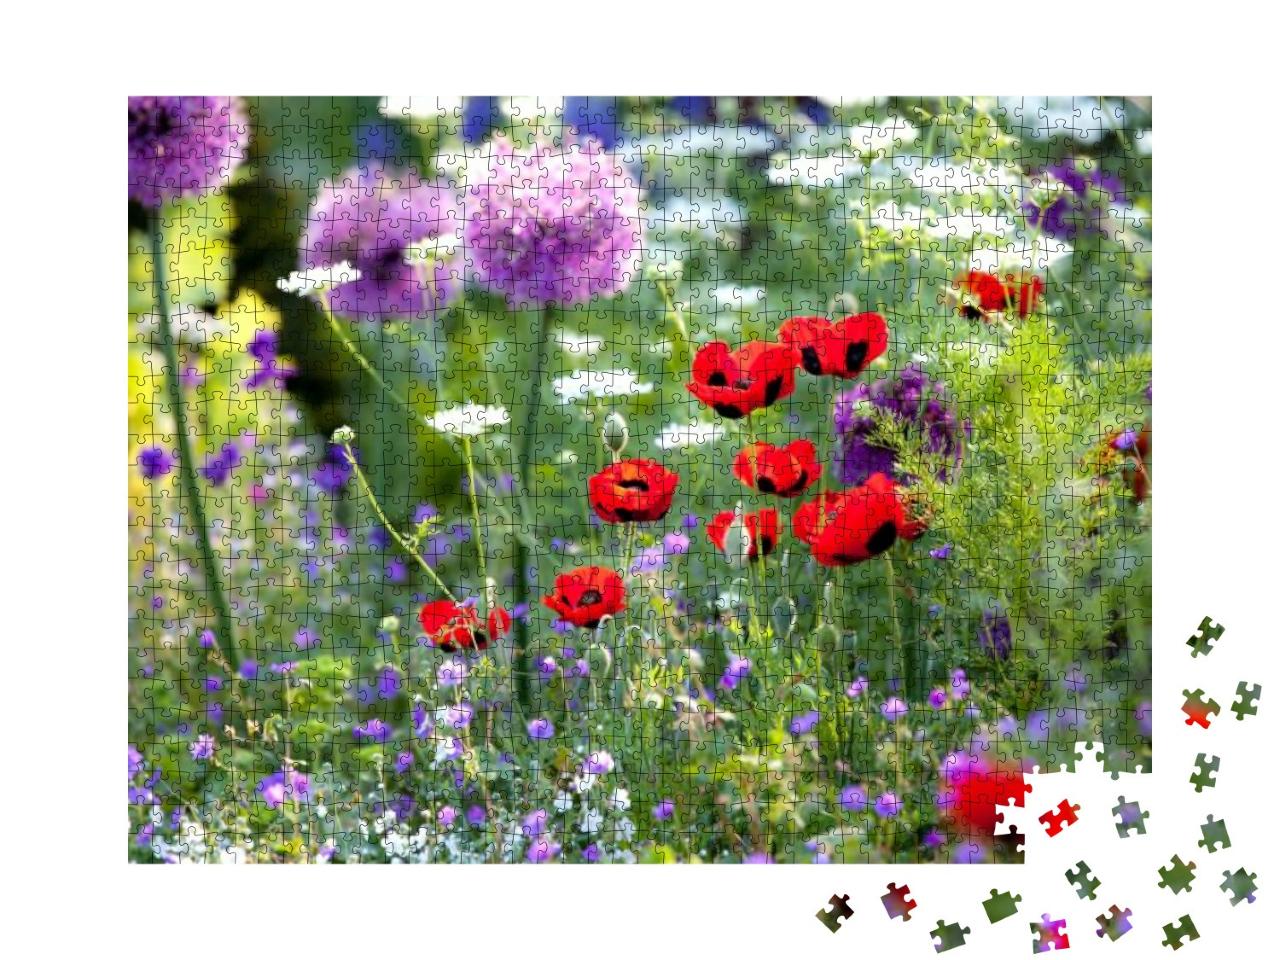 Wild Flower Garden with Poppies with Morning Sunlight... Jigsaw Puzzle with 1000 pieces